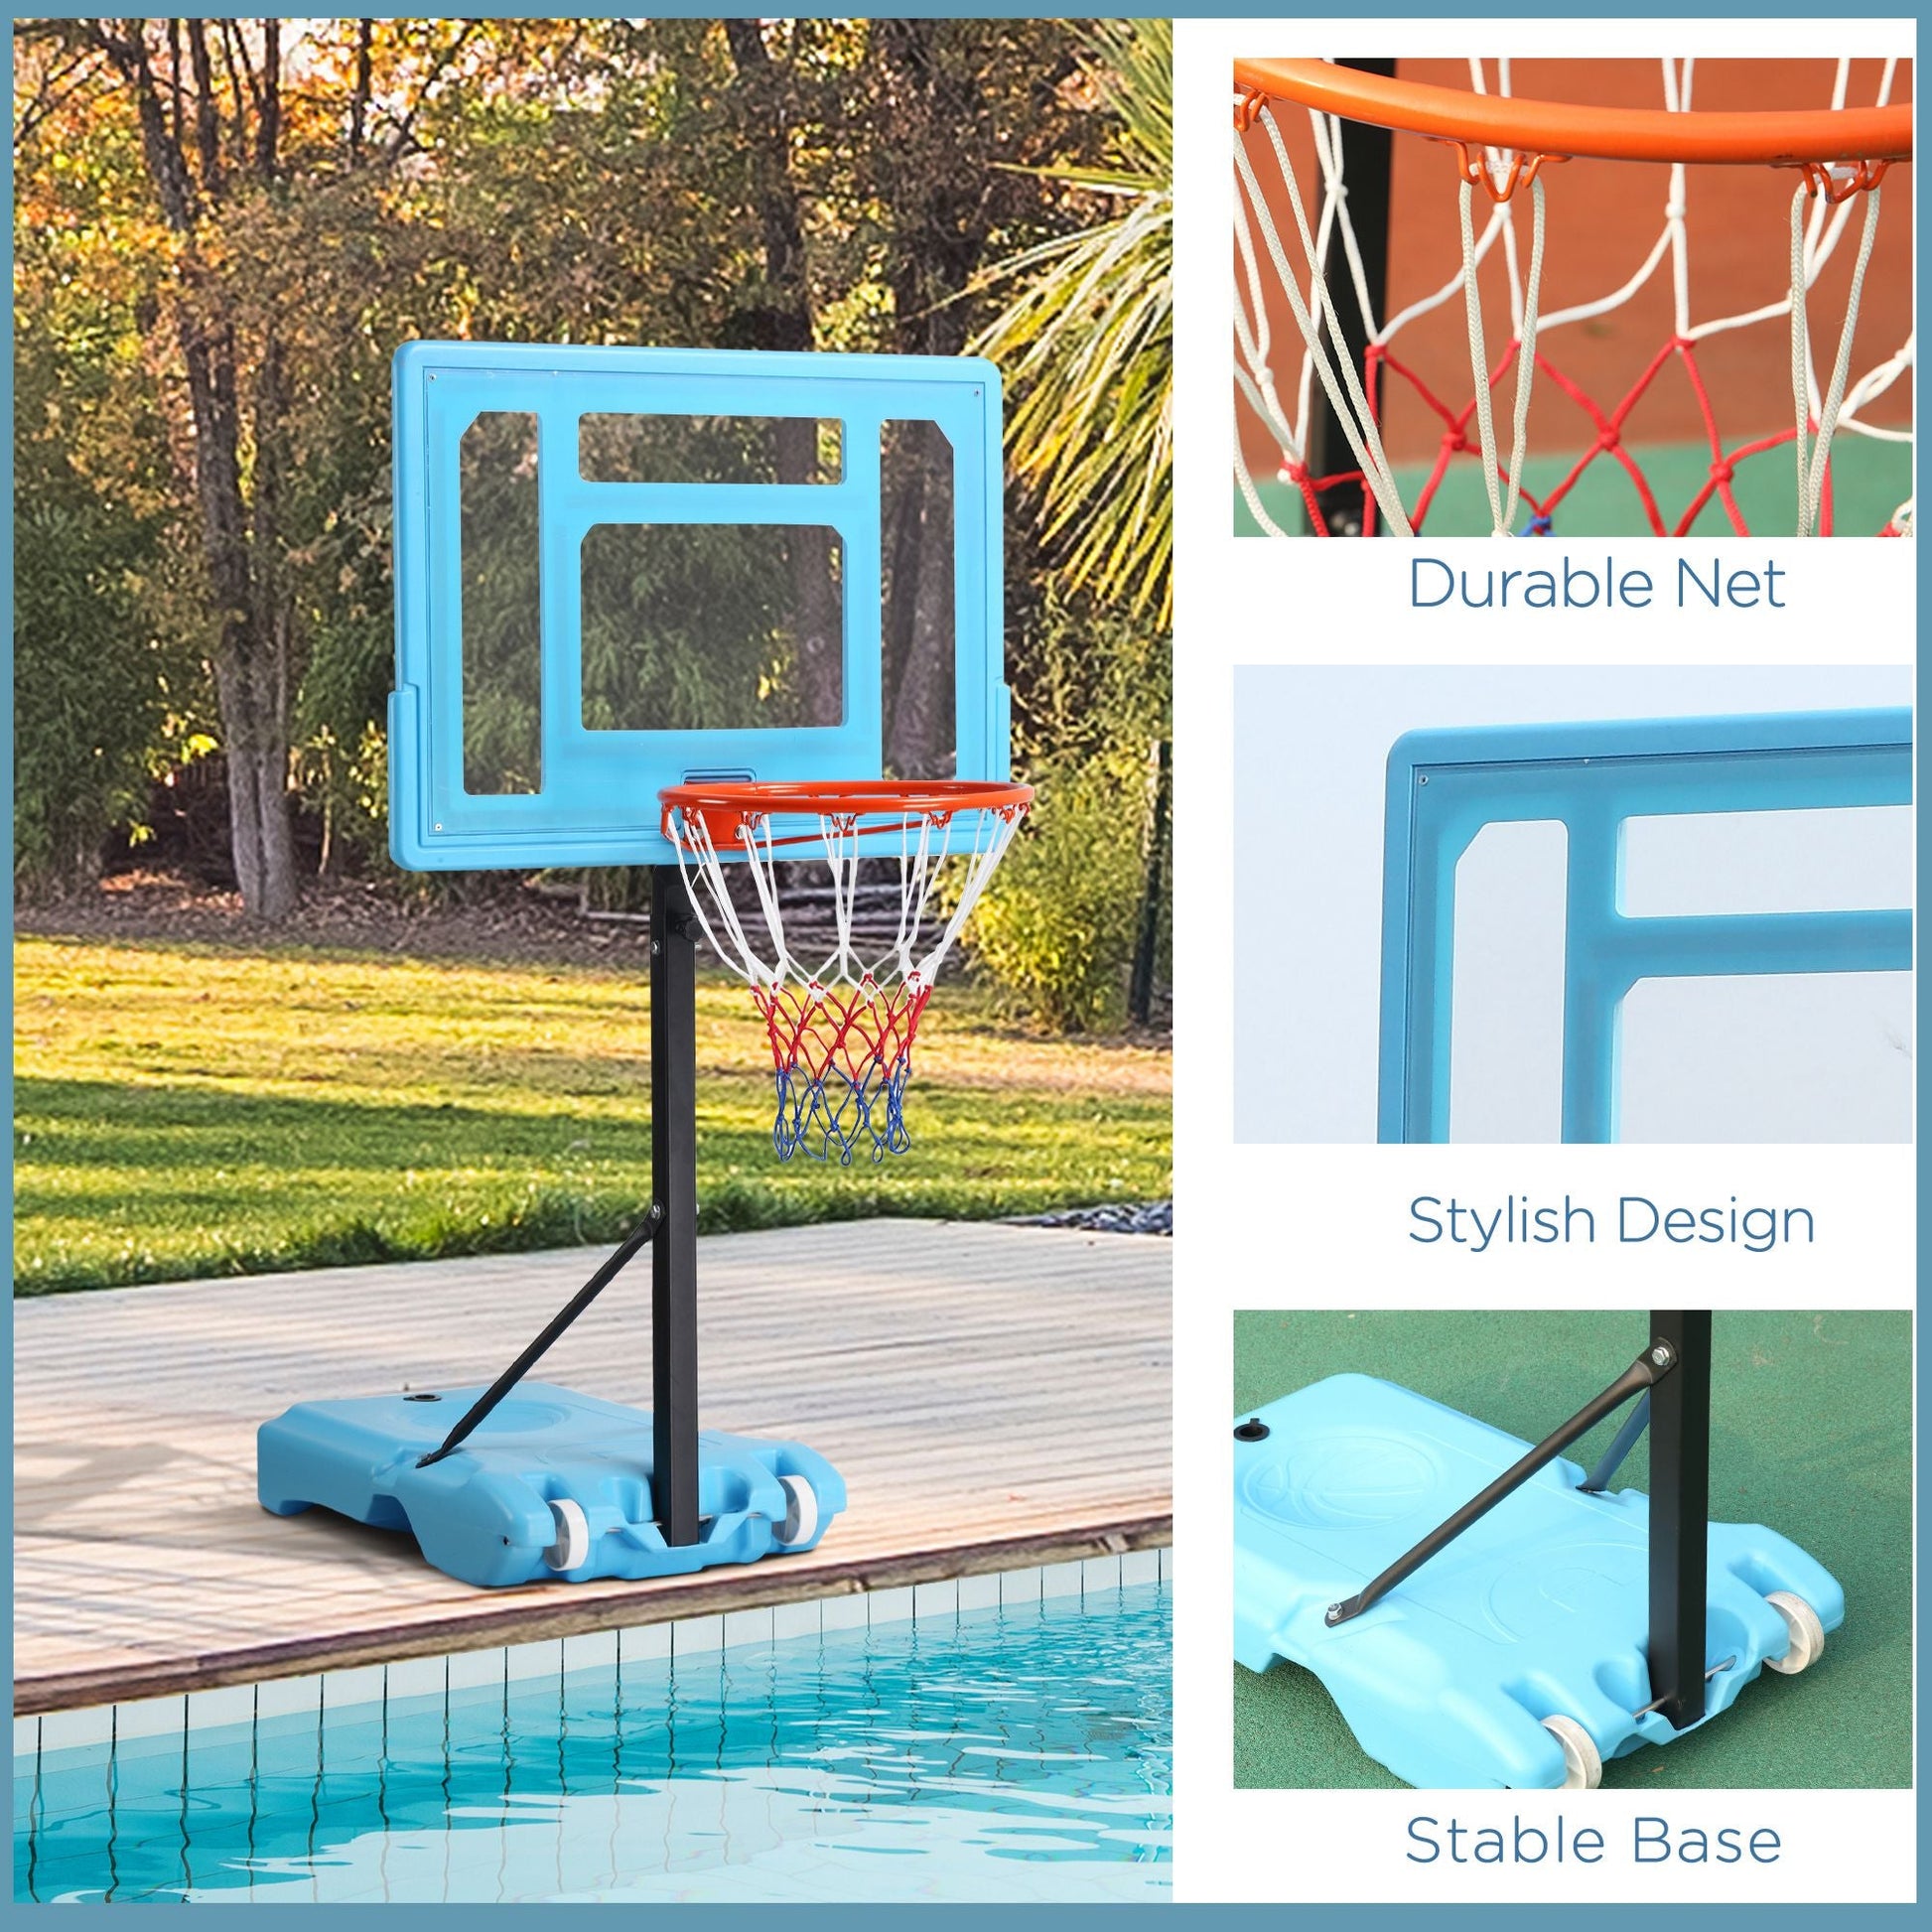 Poolside Basketball Hoop Stand, 36.5"-48.5" Height Adjustable Portable Hoop System Goal Stand, w/ Clear Backboard &; Fillable Base for Adults &; Kids, Blue at Gallery Canada